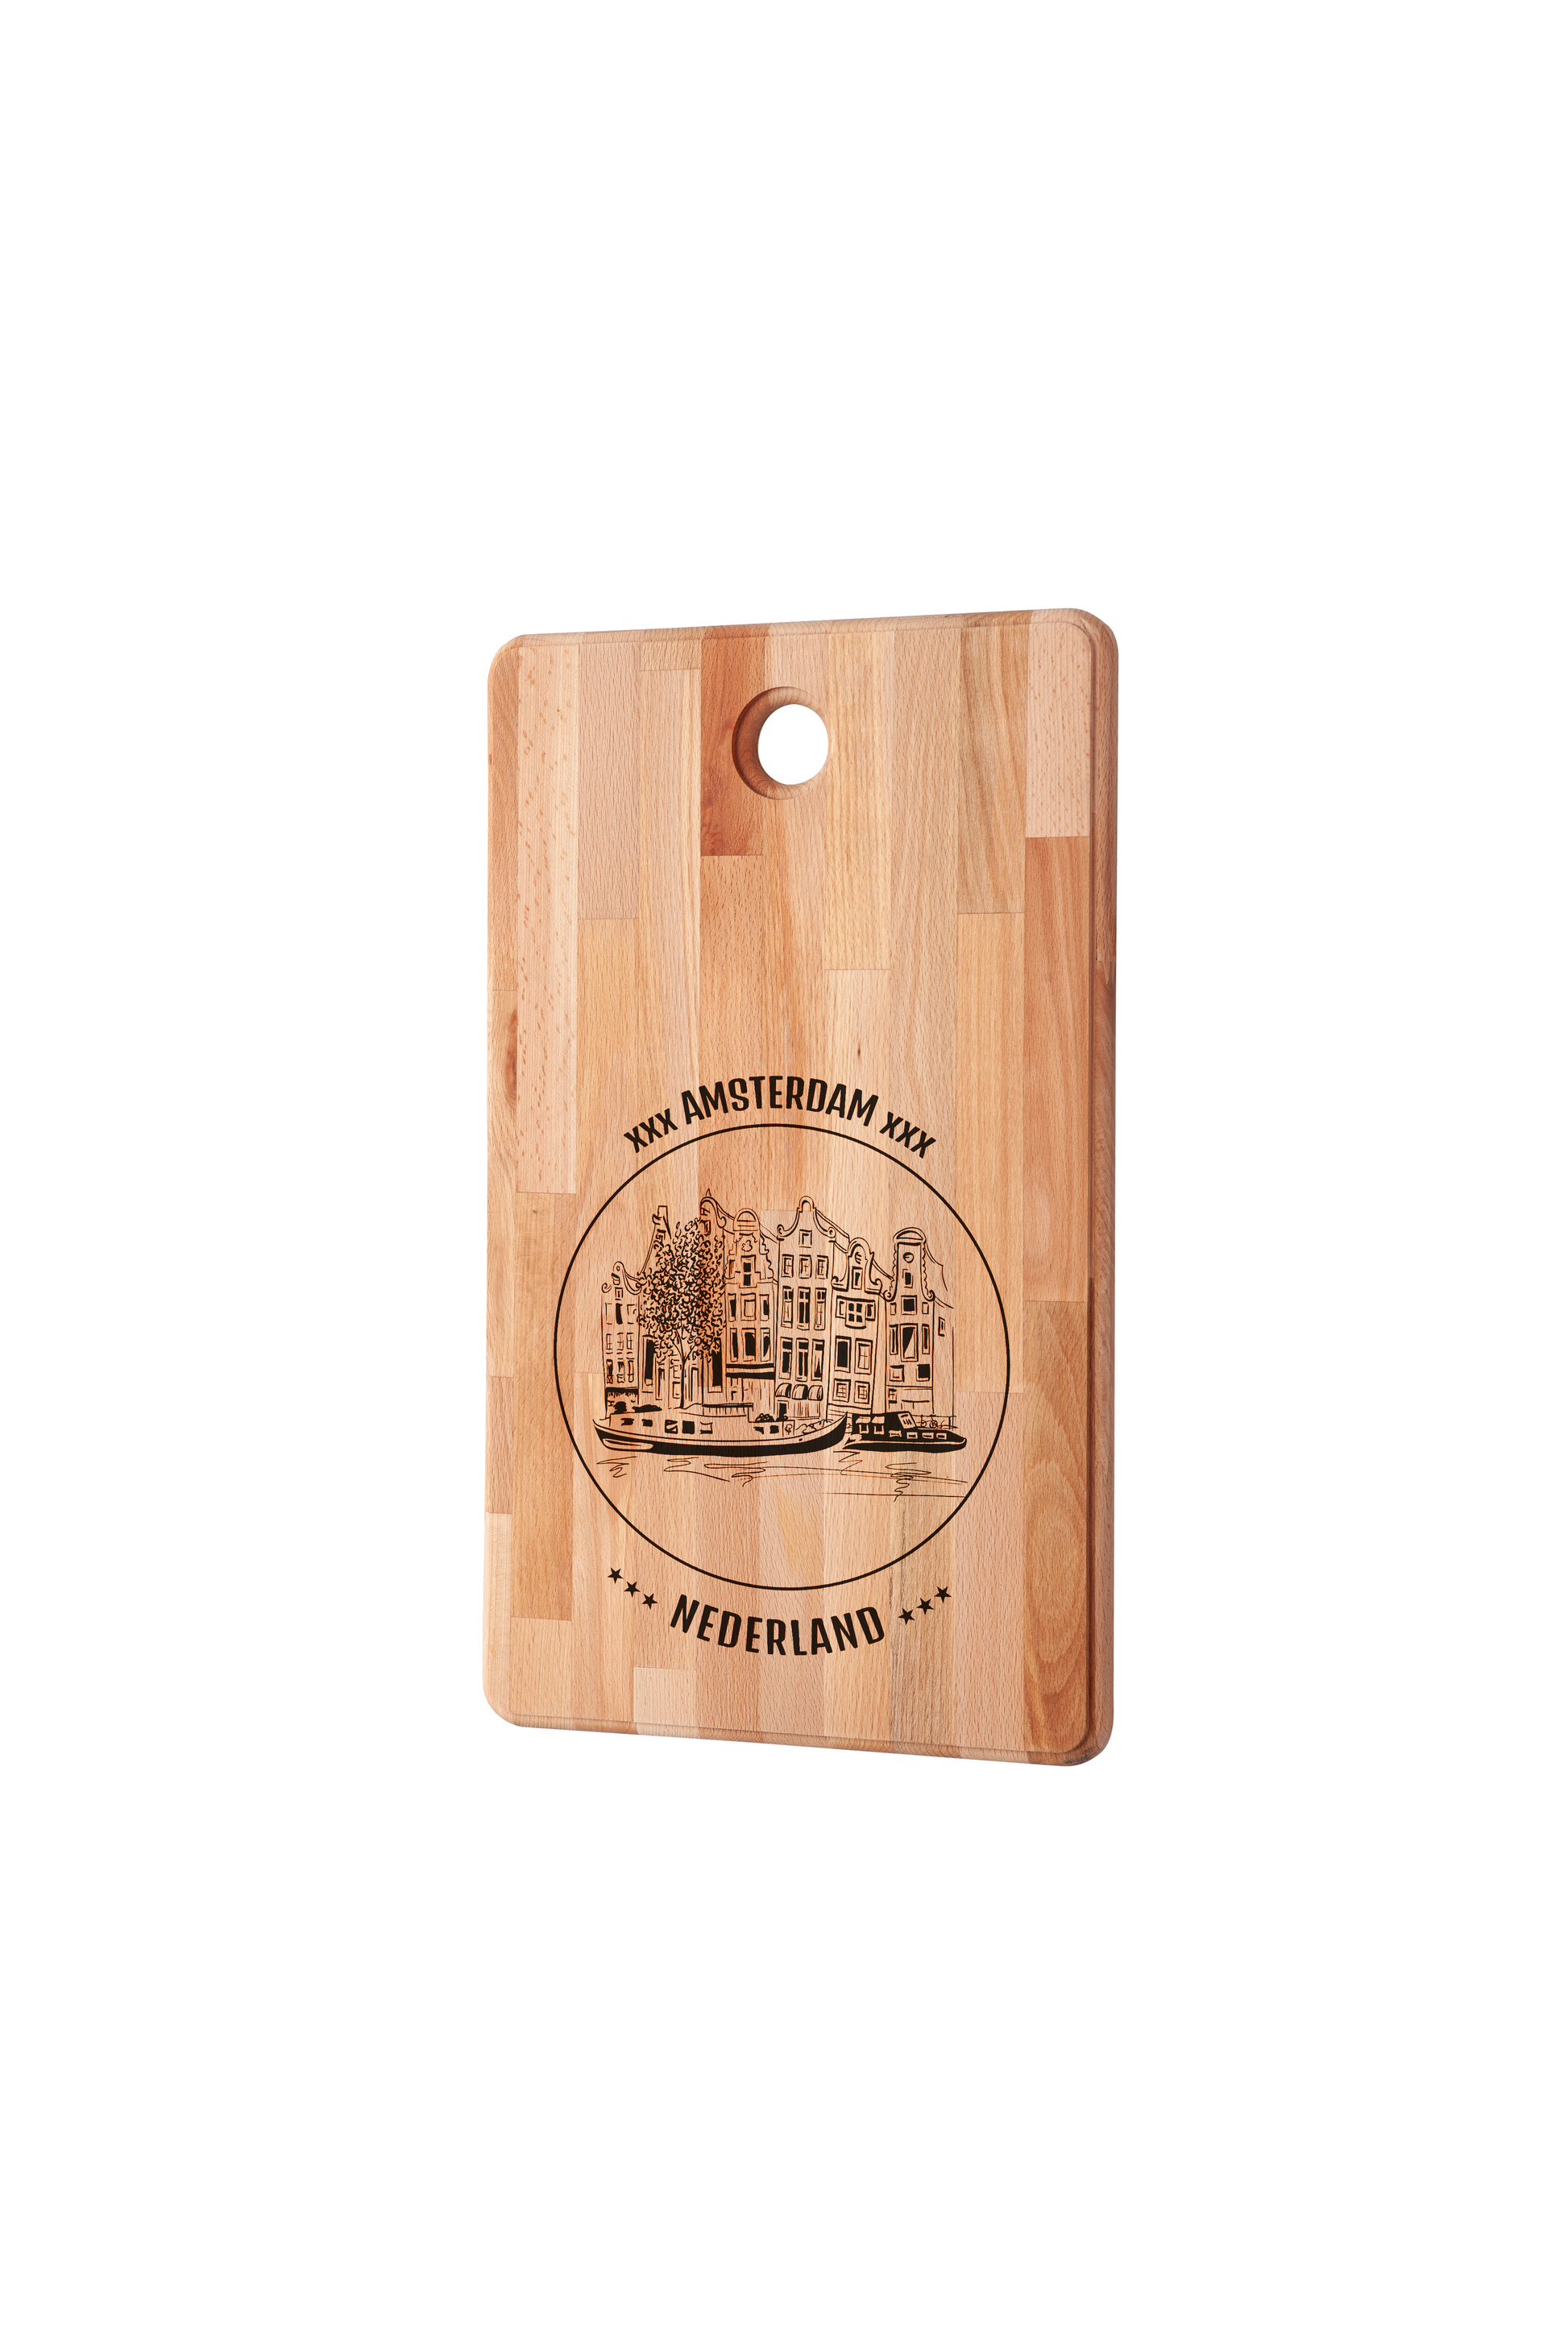 Amsterdam, Houses, cutting board, side view